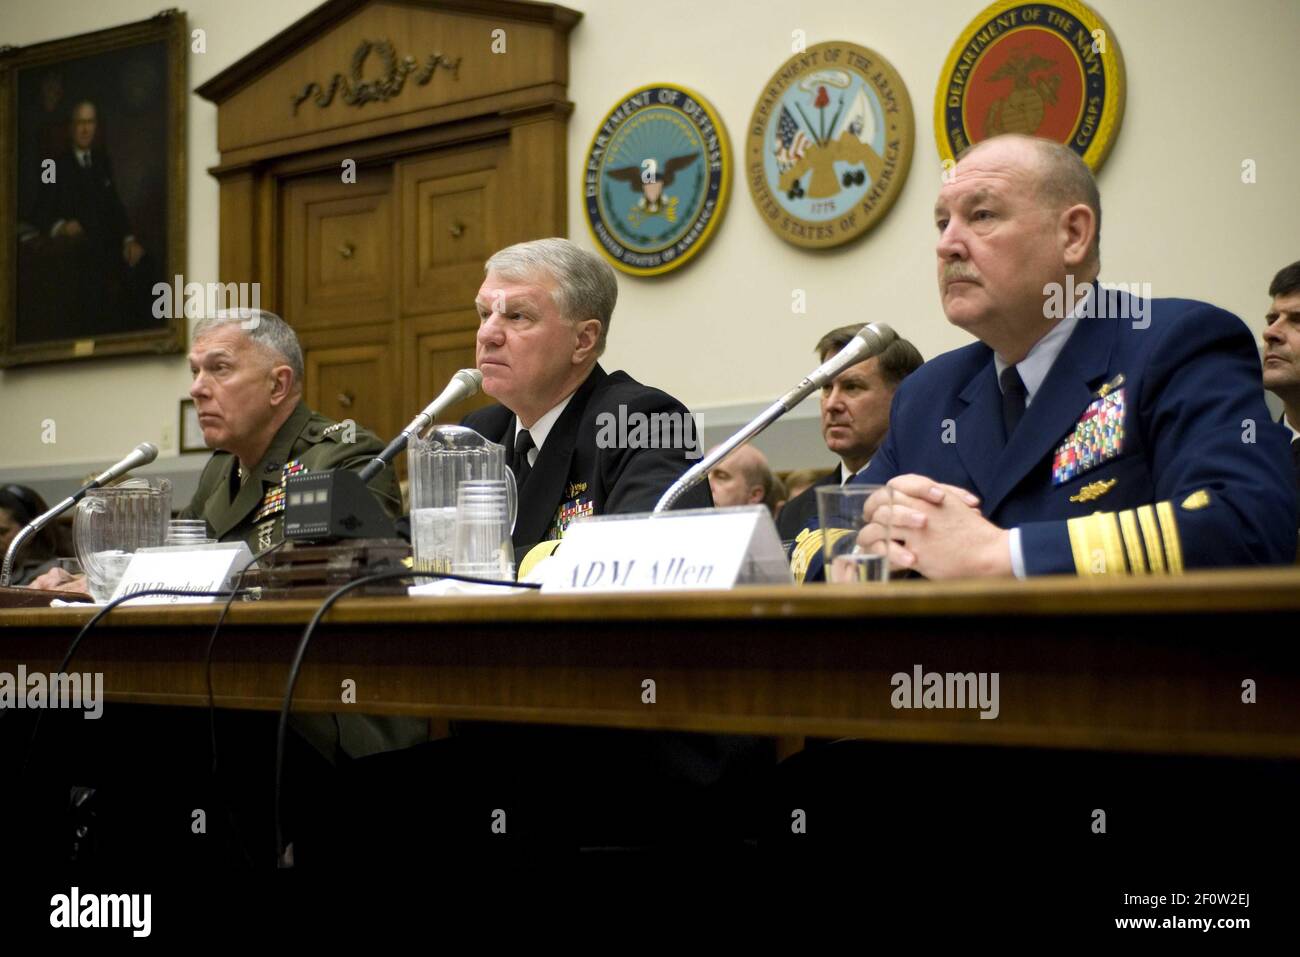 13 December 2007 - Washington, DC - From left, Commandant of the Marine Corps Gen. James T. Conway, Chief of Naval Operations (CNO) Adm. Gary Roughead and Commandant of the Coast Guard Adm. Thad W. Allen appear before the House Armed Services Committee to give testimony and answer questions concerning the unified maritime strategy. Ã’The Cooperative Maritime Strategy for 21st Century SeapowerÃ’, seeks to use the assets of all three of the nationÃ•s maritime services to achieve a balance of peacetime engagement and major combat operation capabilities to include forward presence, deterrence, sea Stock Photo